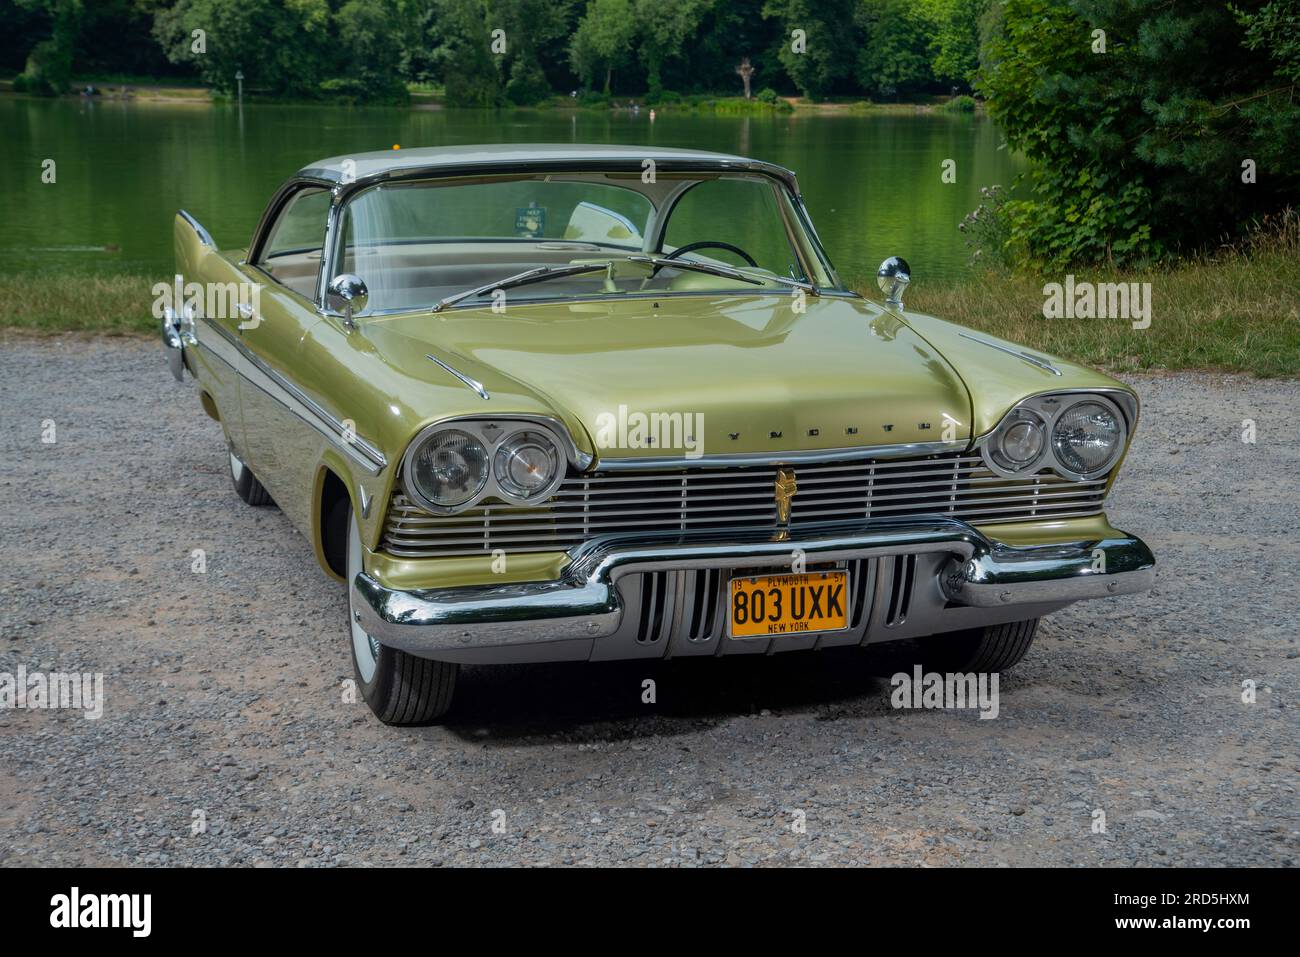 1957 Plymouth Belvedere 'Full Size' classic American family car Stock Photo  - Alamy